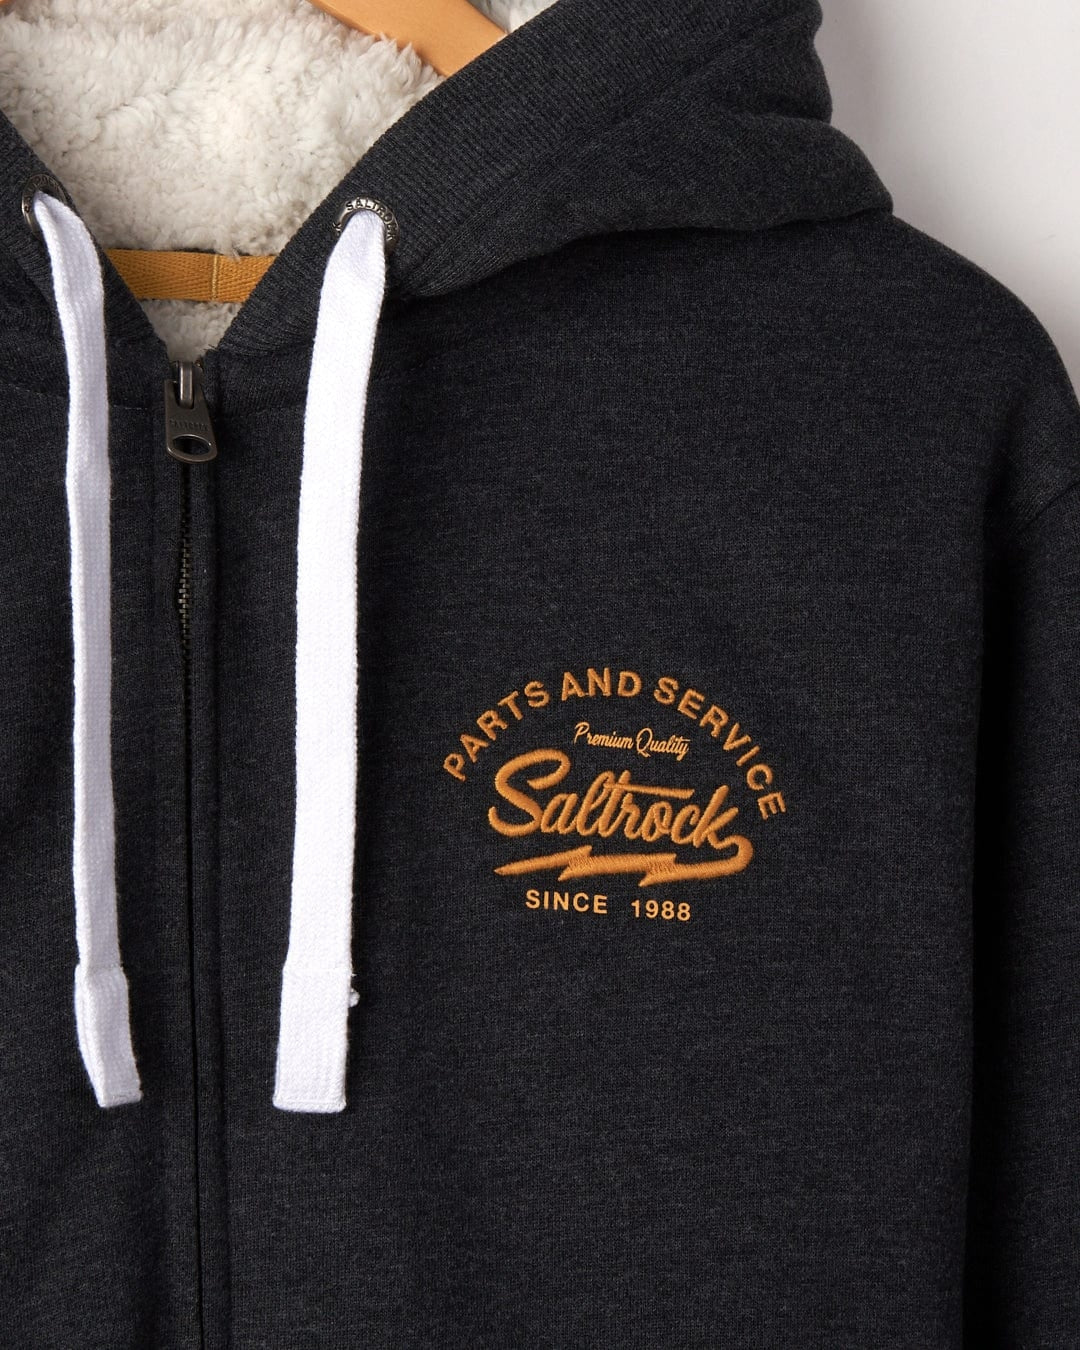 Men's borg lined Vegas Script hoodie from Saltrock in dark grey with logo embroidered on one side of the chest.